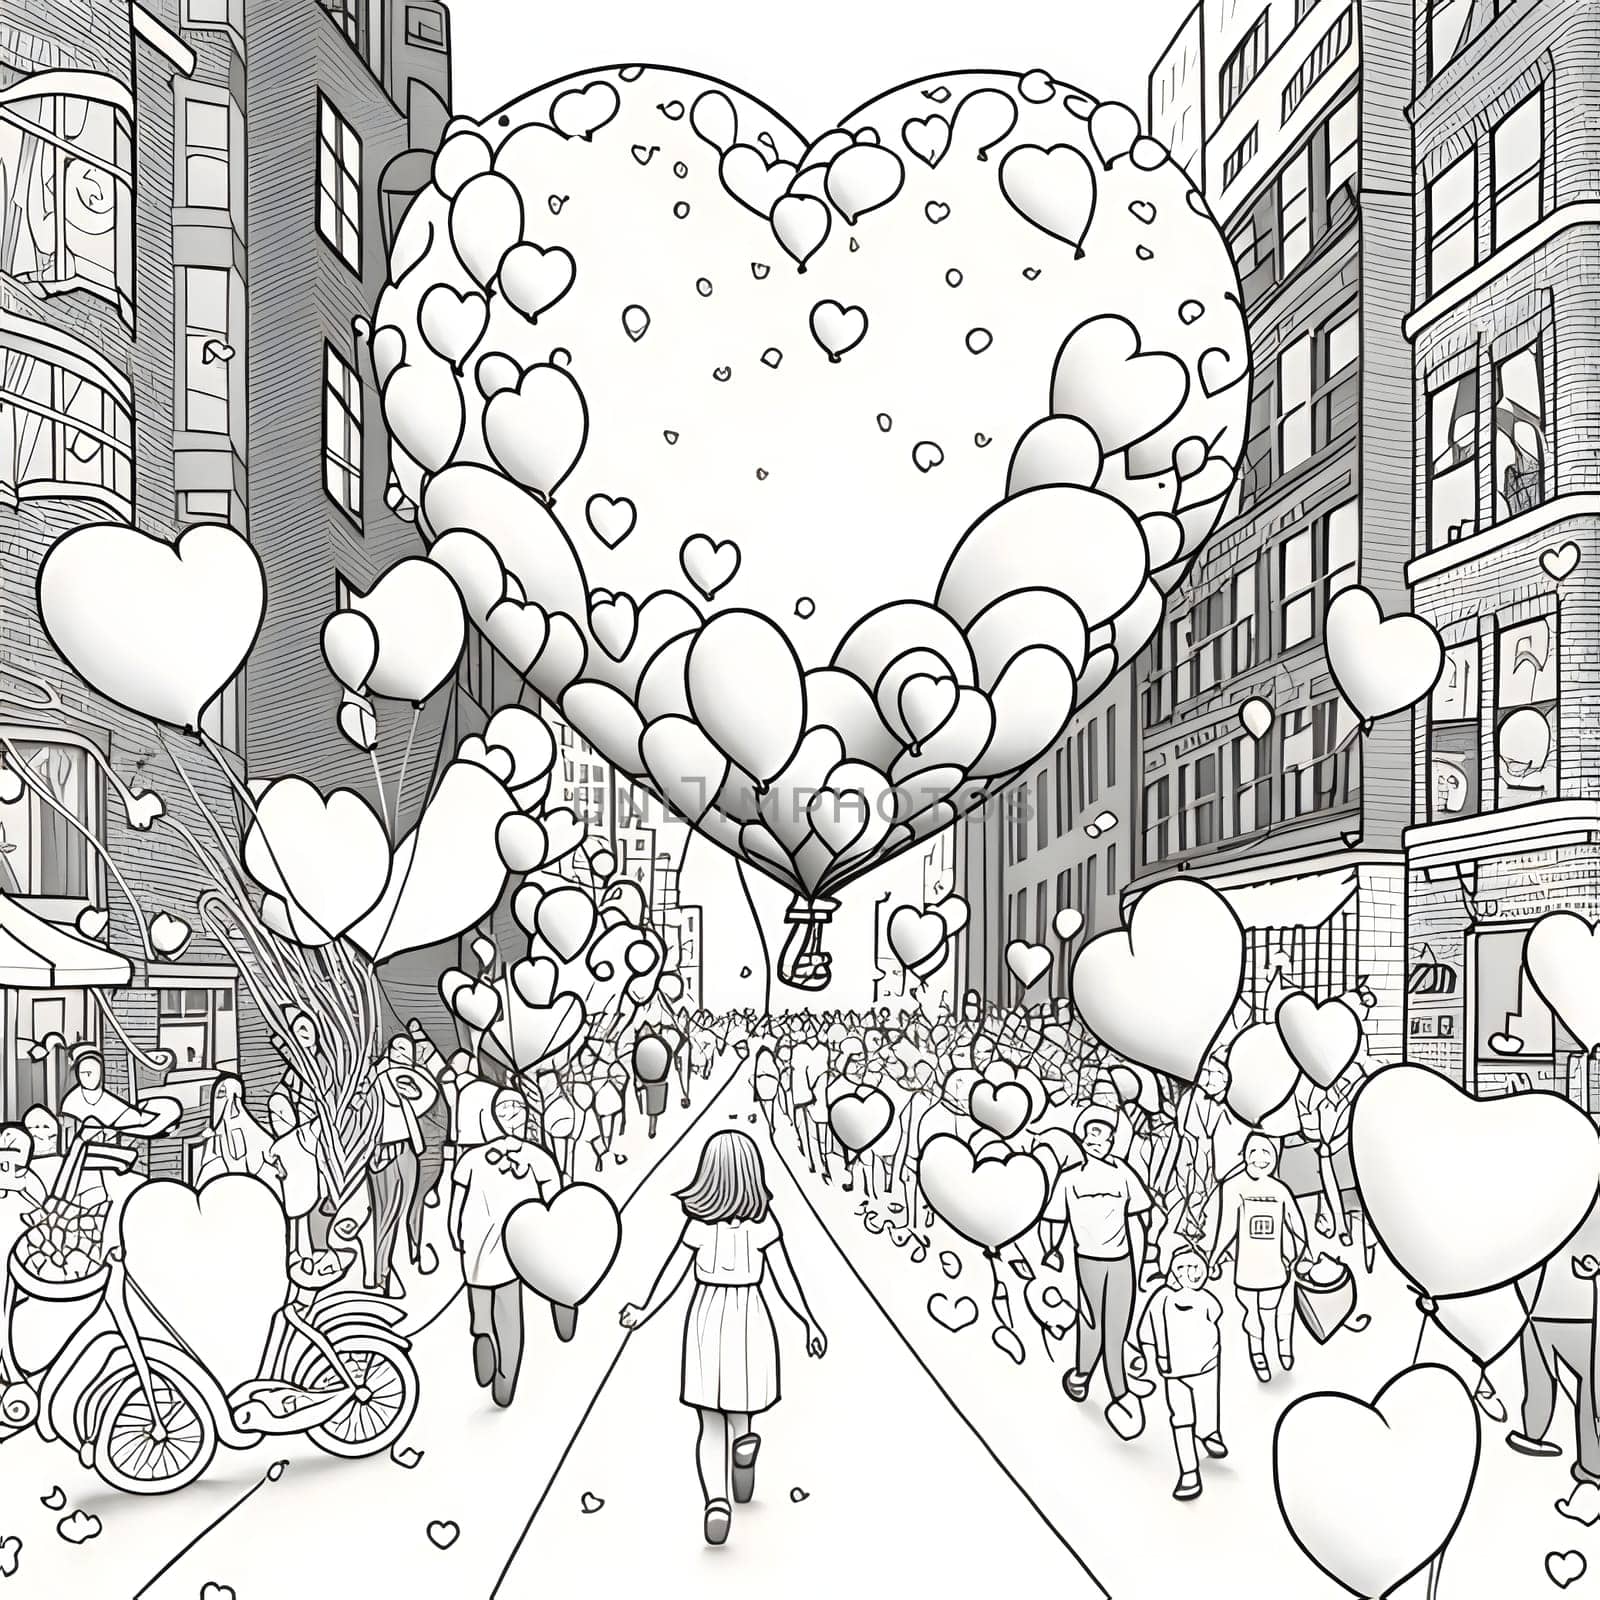 A giant heart, a crowd. People and confetti black and white coloring sheet. New Year's party and celebrations. by ThemesS